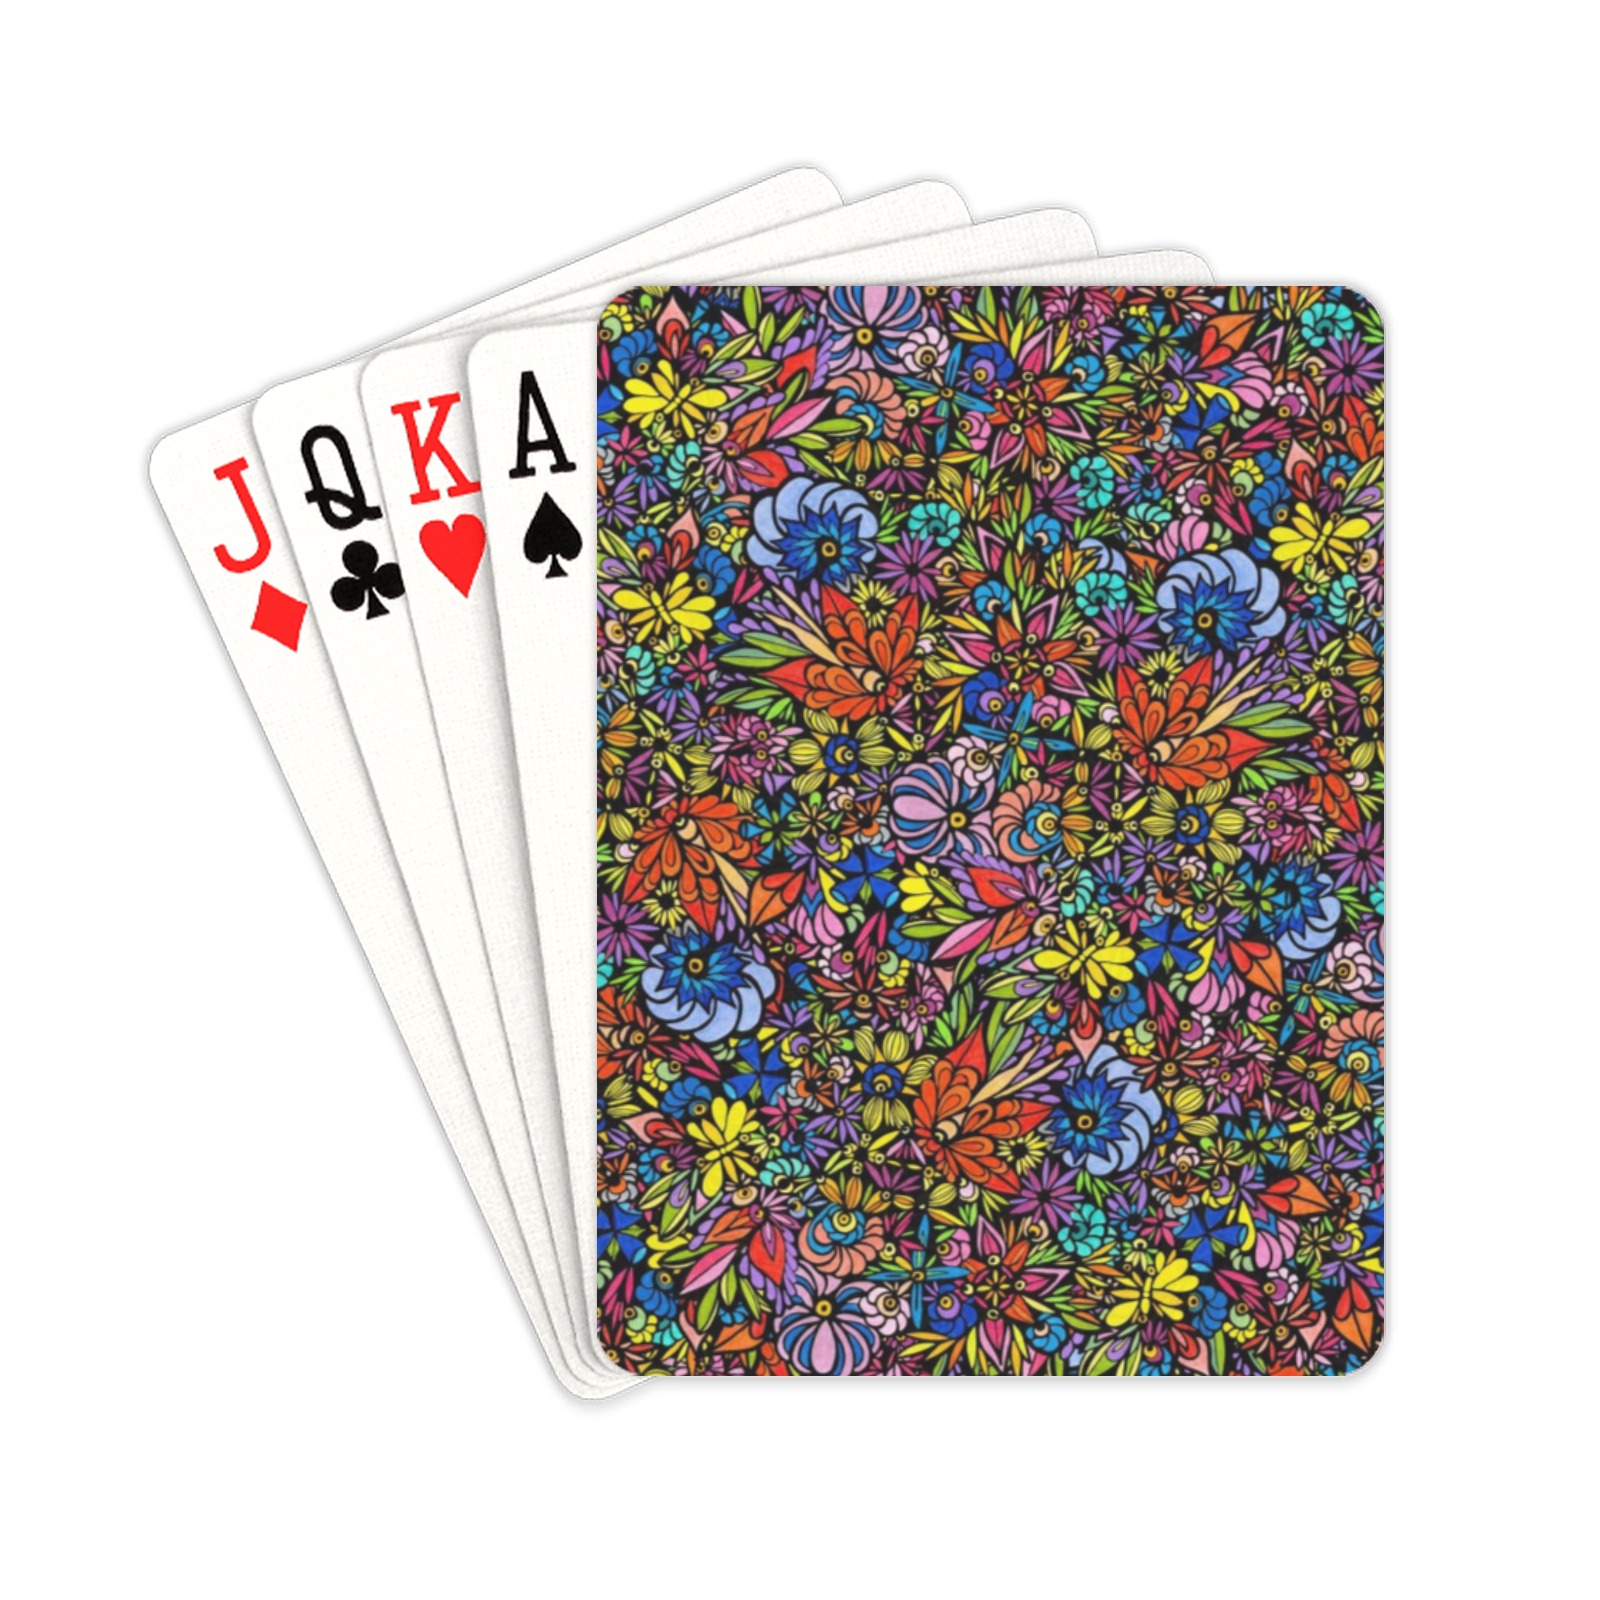 Lac La Hache Wildflowers Playing Cards 2.5"x3.5"